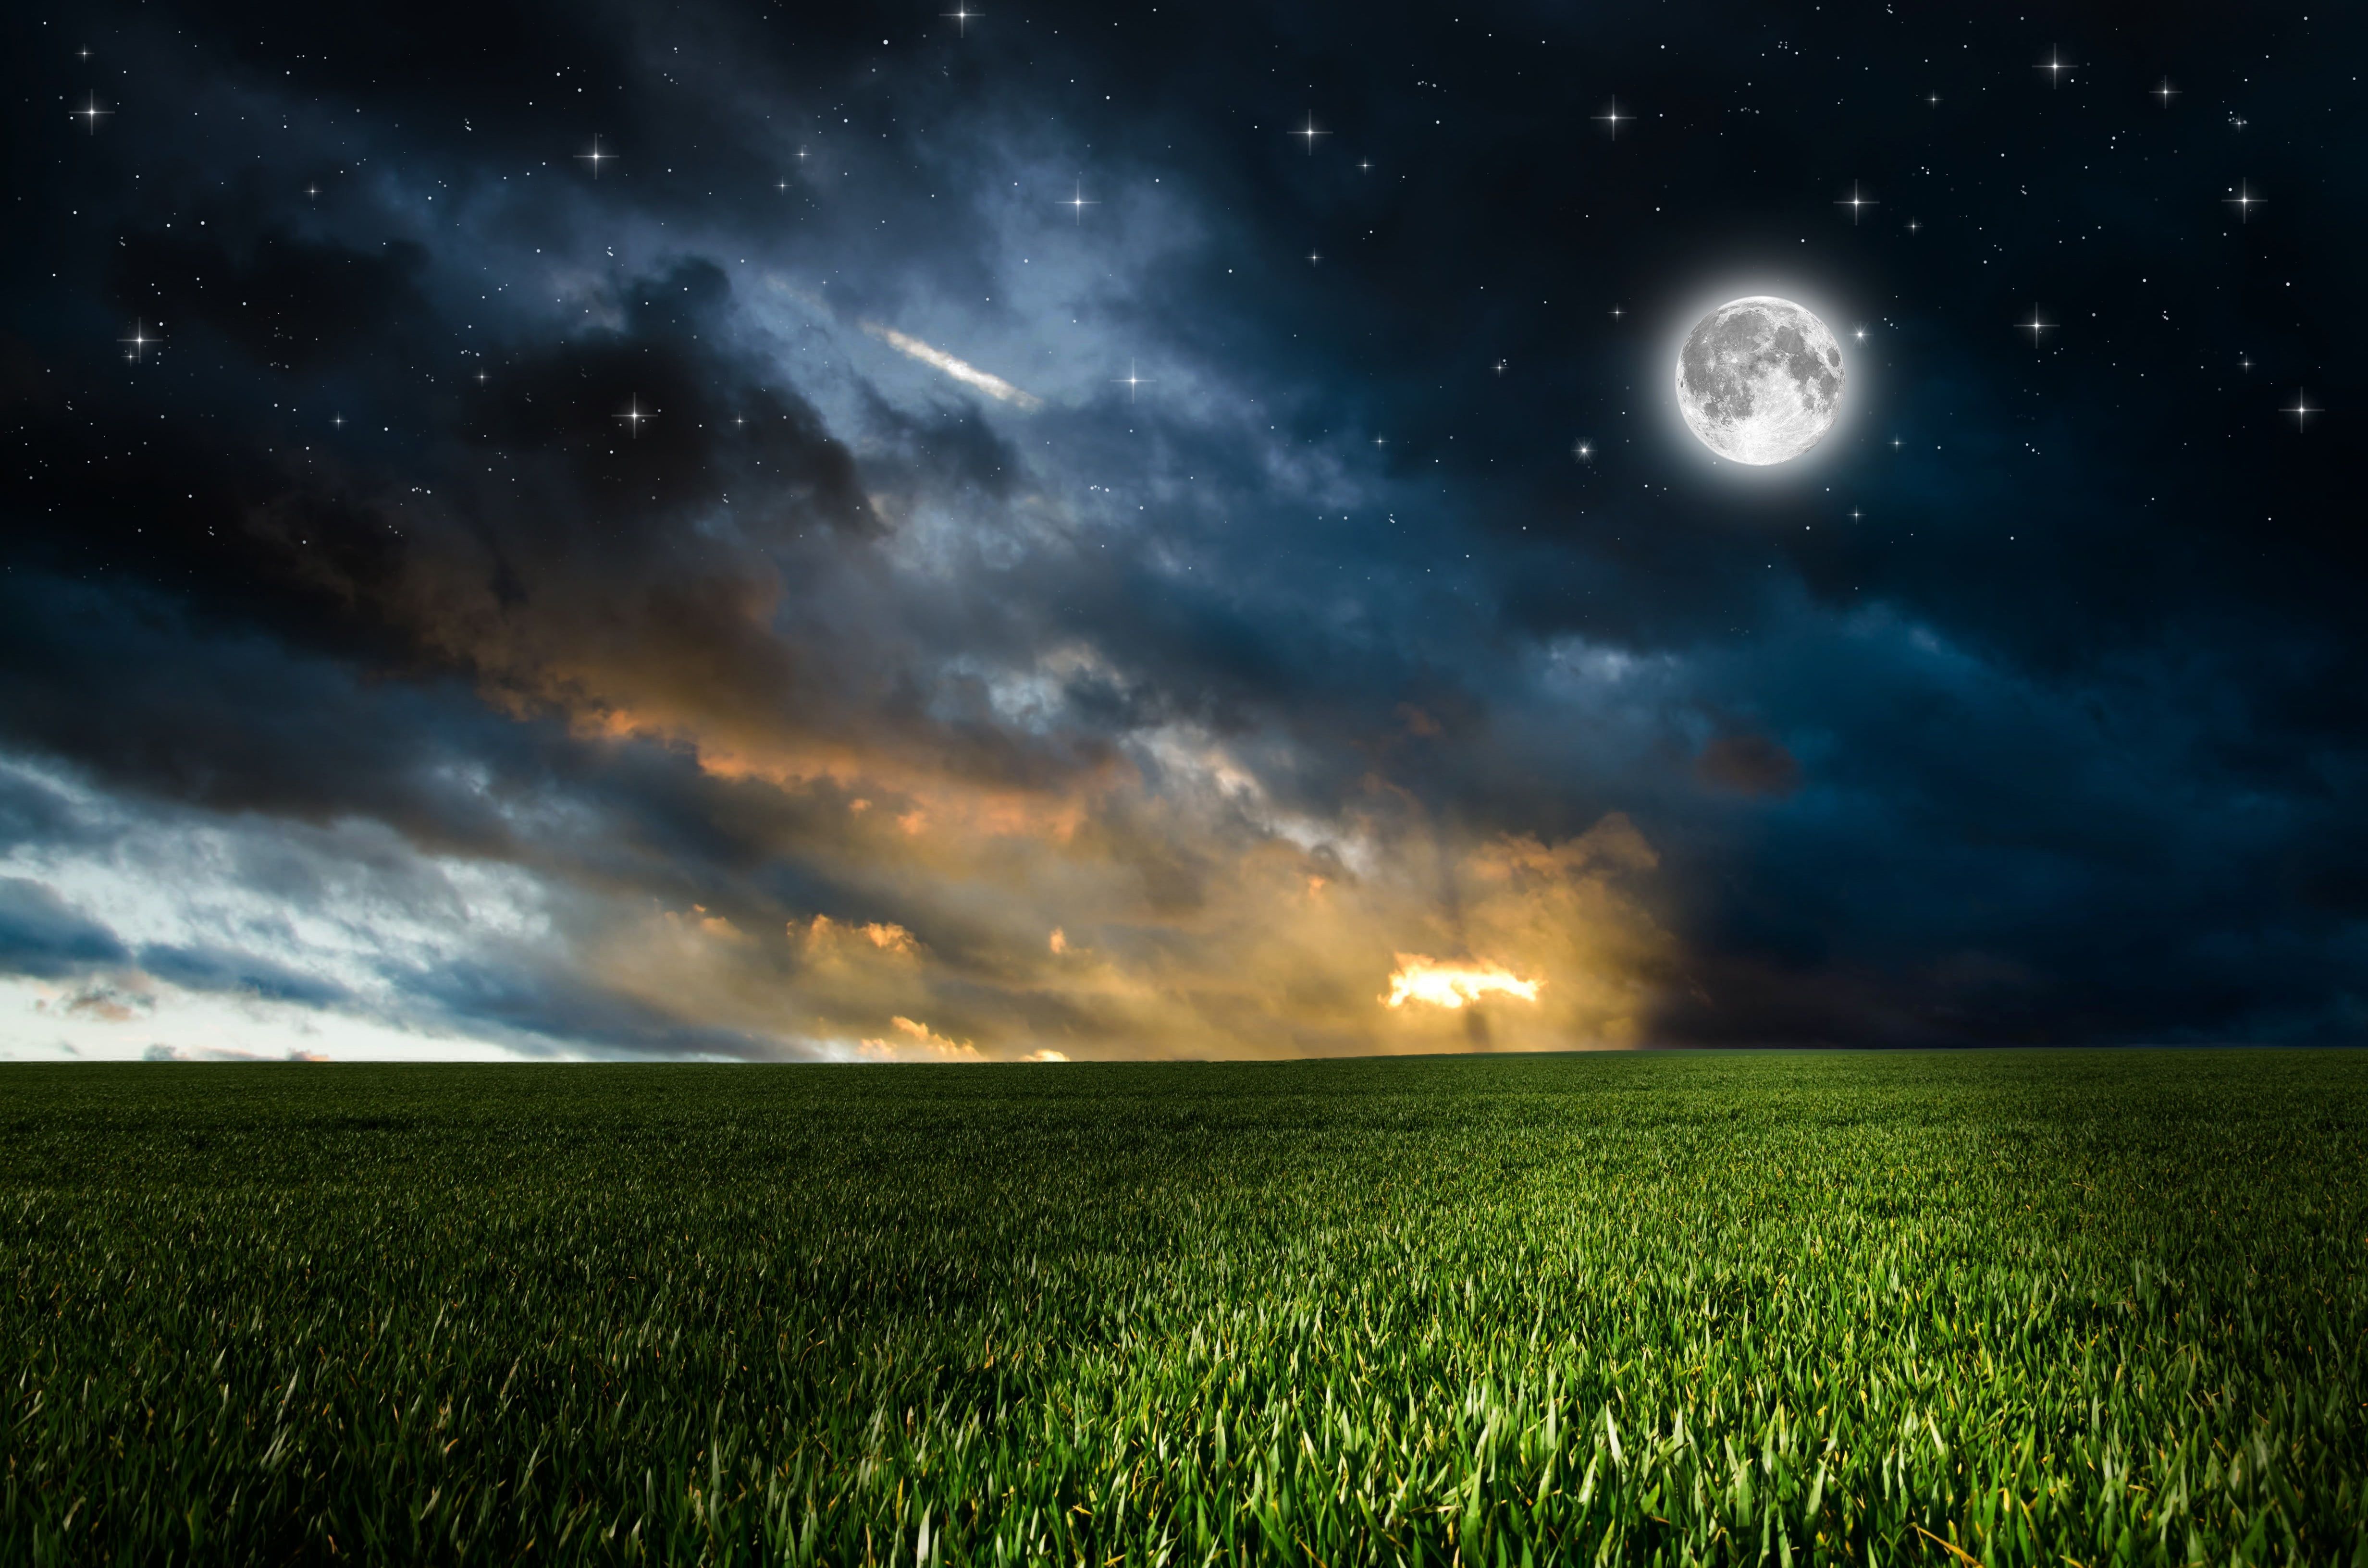 green grass field and full moon #greens #field the sky #grass #clouds #night the moon #photoshop #stars K #wallpaper. Scenery, Landscape, Mountain illustration